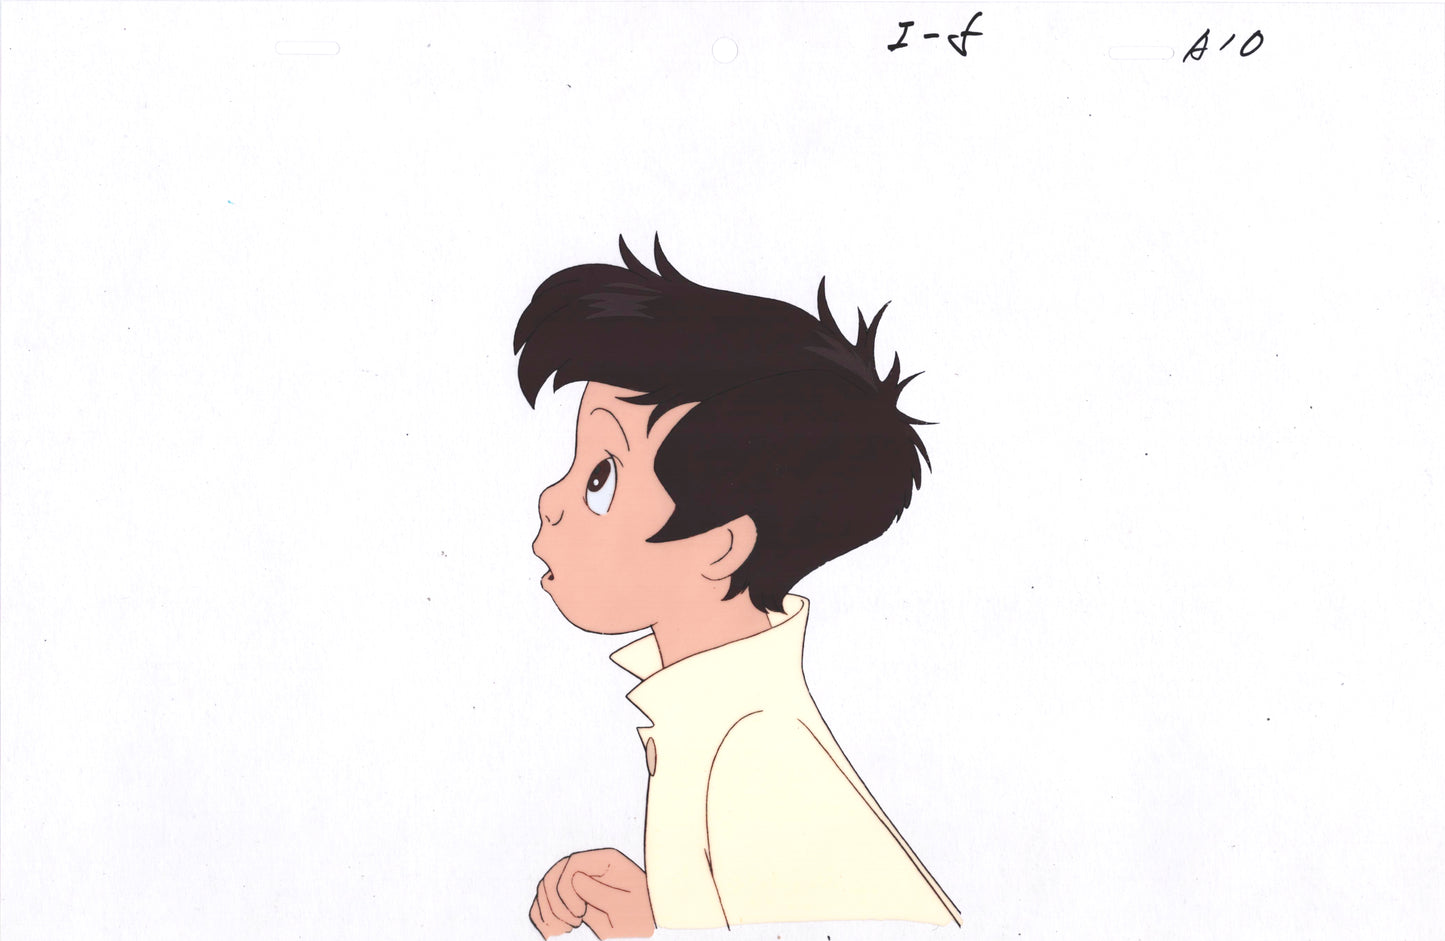 Little Nemo Adventures in Slumberland Production Animation Cel and Drawing from the 1989 Winsor McCay Cartoon A-A10